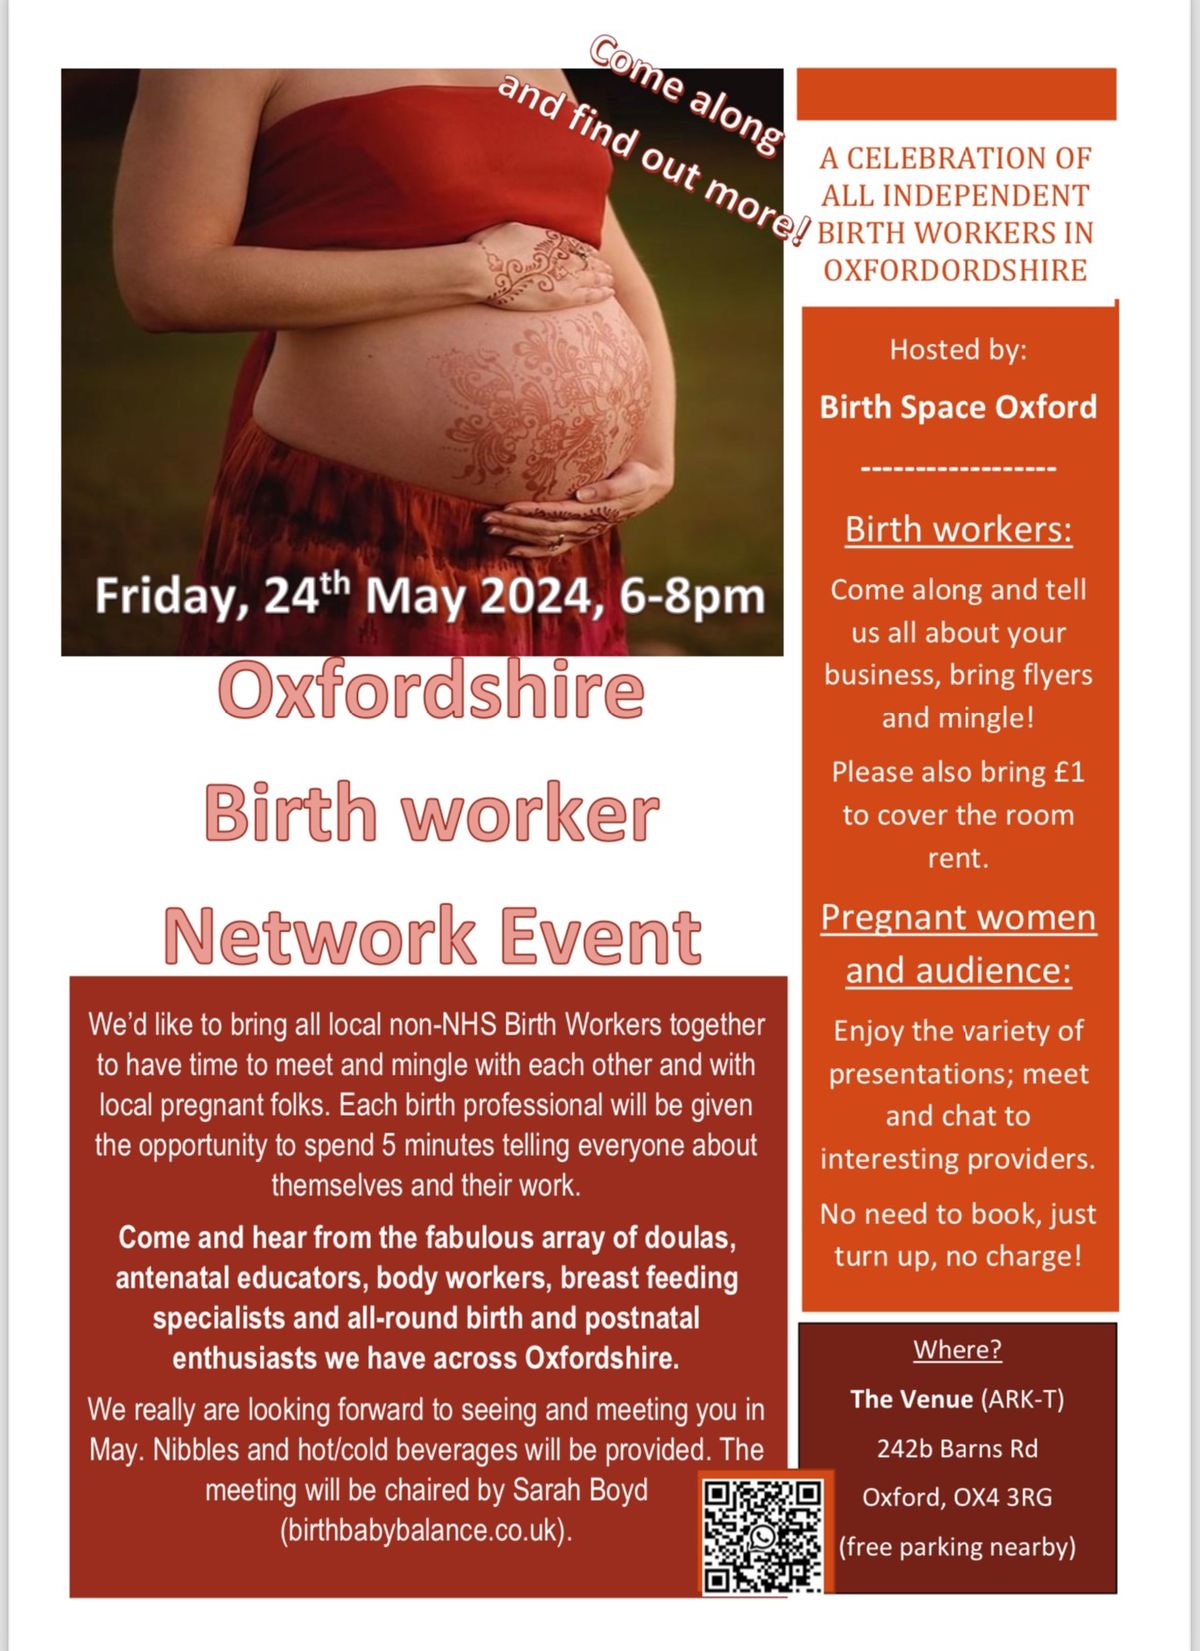 May Meeting - OXFORDSHIRE BIRTH WORKER NETOWRK EVENT!